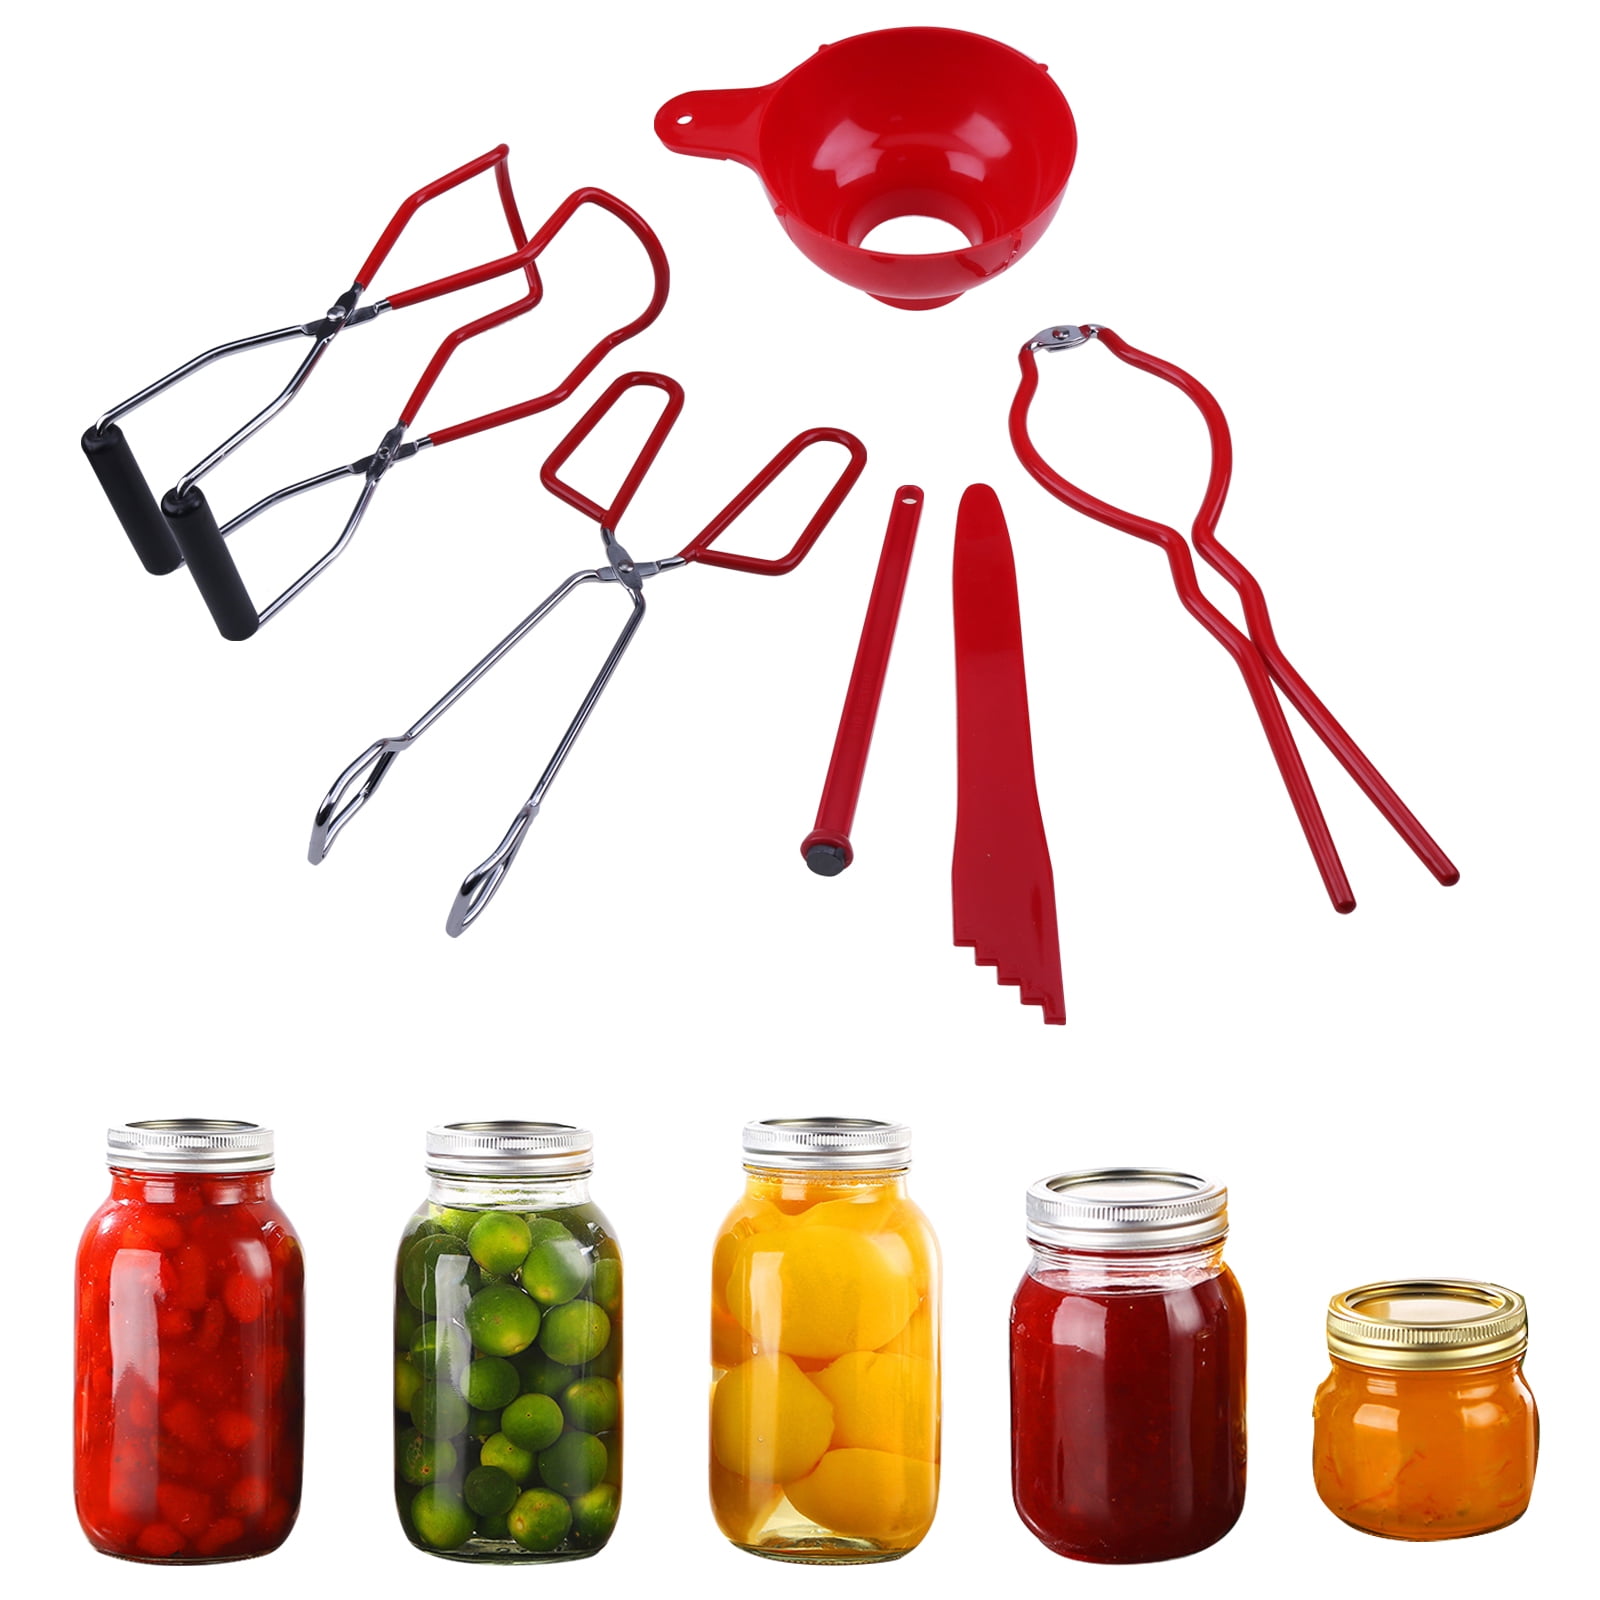 Met Lux Canning Utensil Set, 1 Durable Canning Tool Kit - 6-Piece Set, Includes Vinyl-Coated Jar Tong, Lifter, Wrench, Stainless Steel Canning Equipme